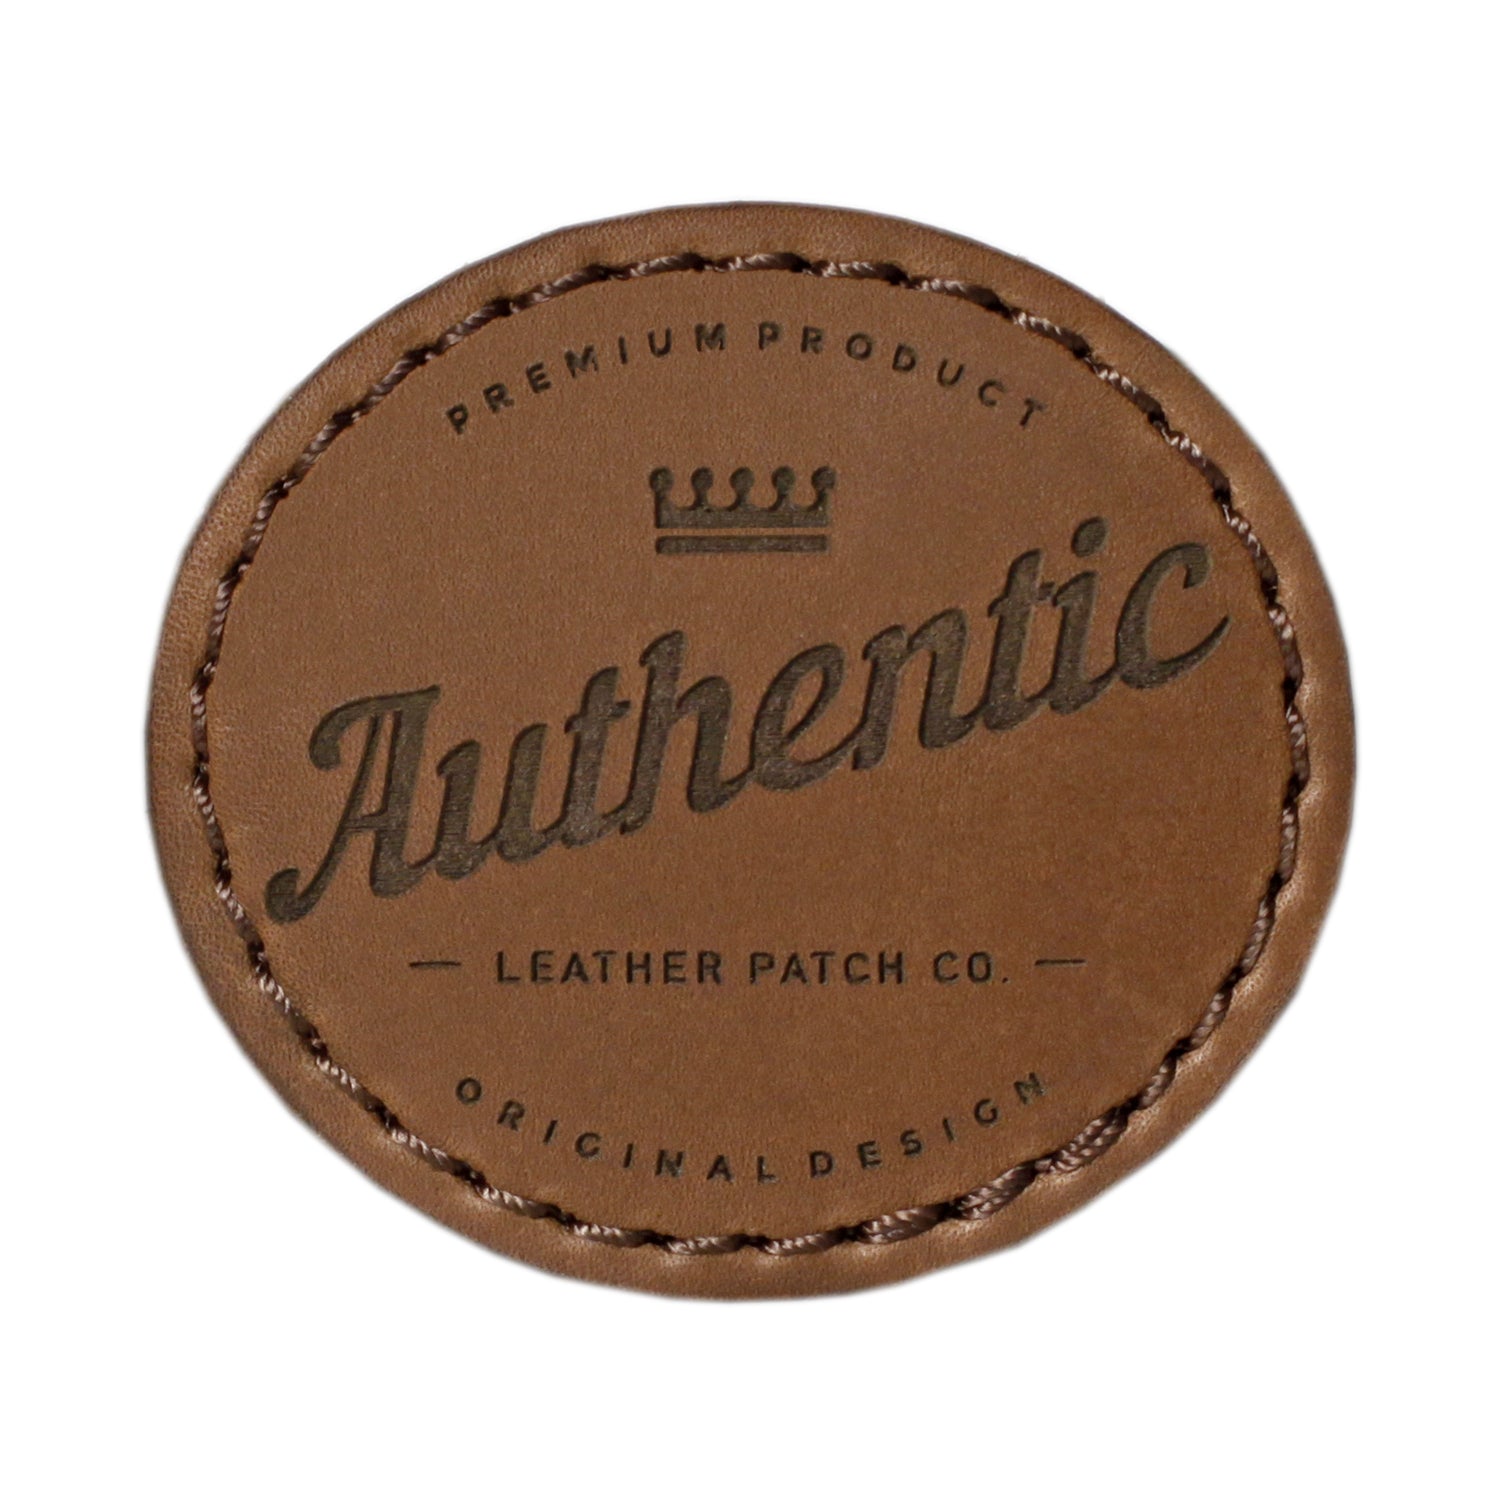 The Many Uses of the Functional and Stylish Leather Patch